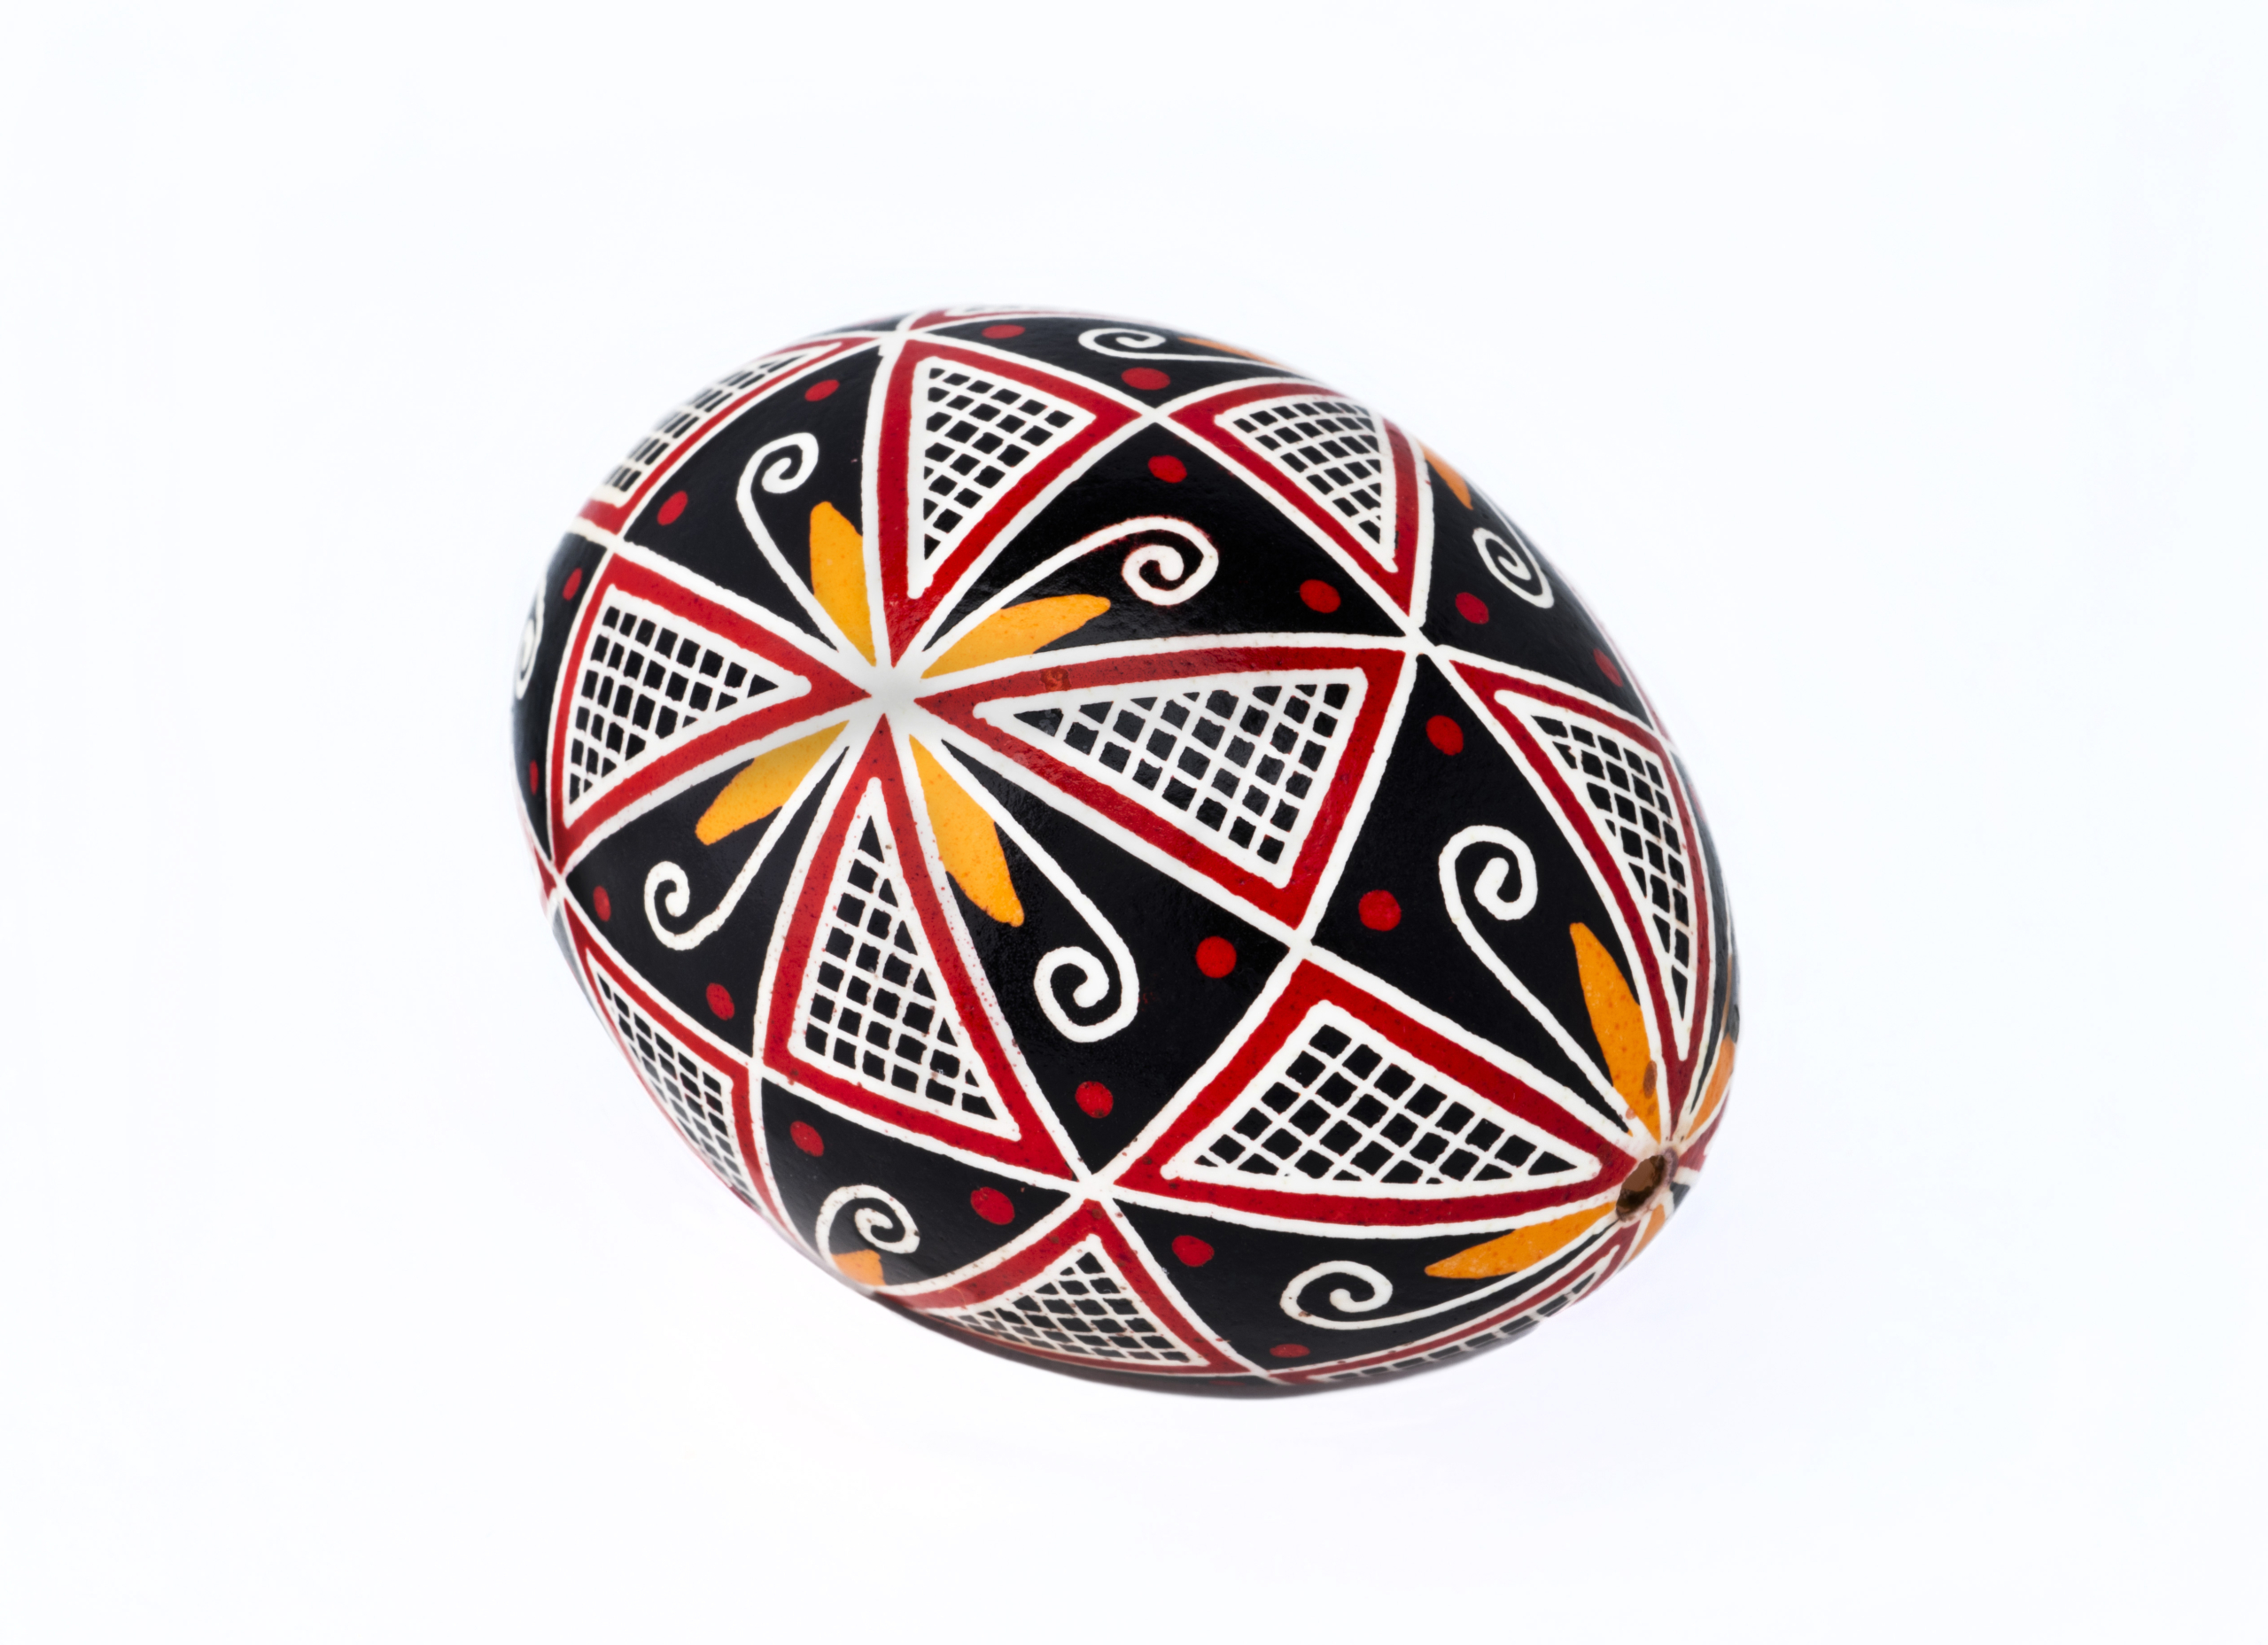 Egg with red, yellow and black geometric patterns